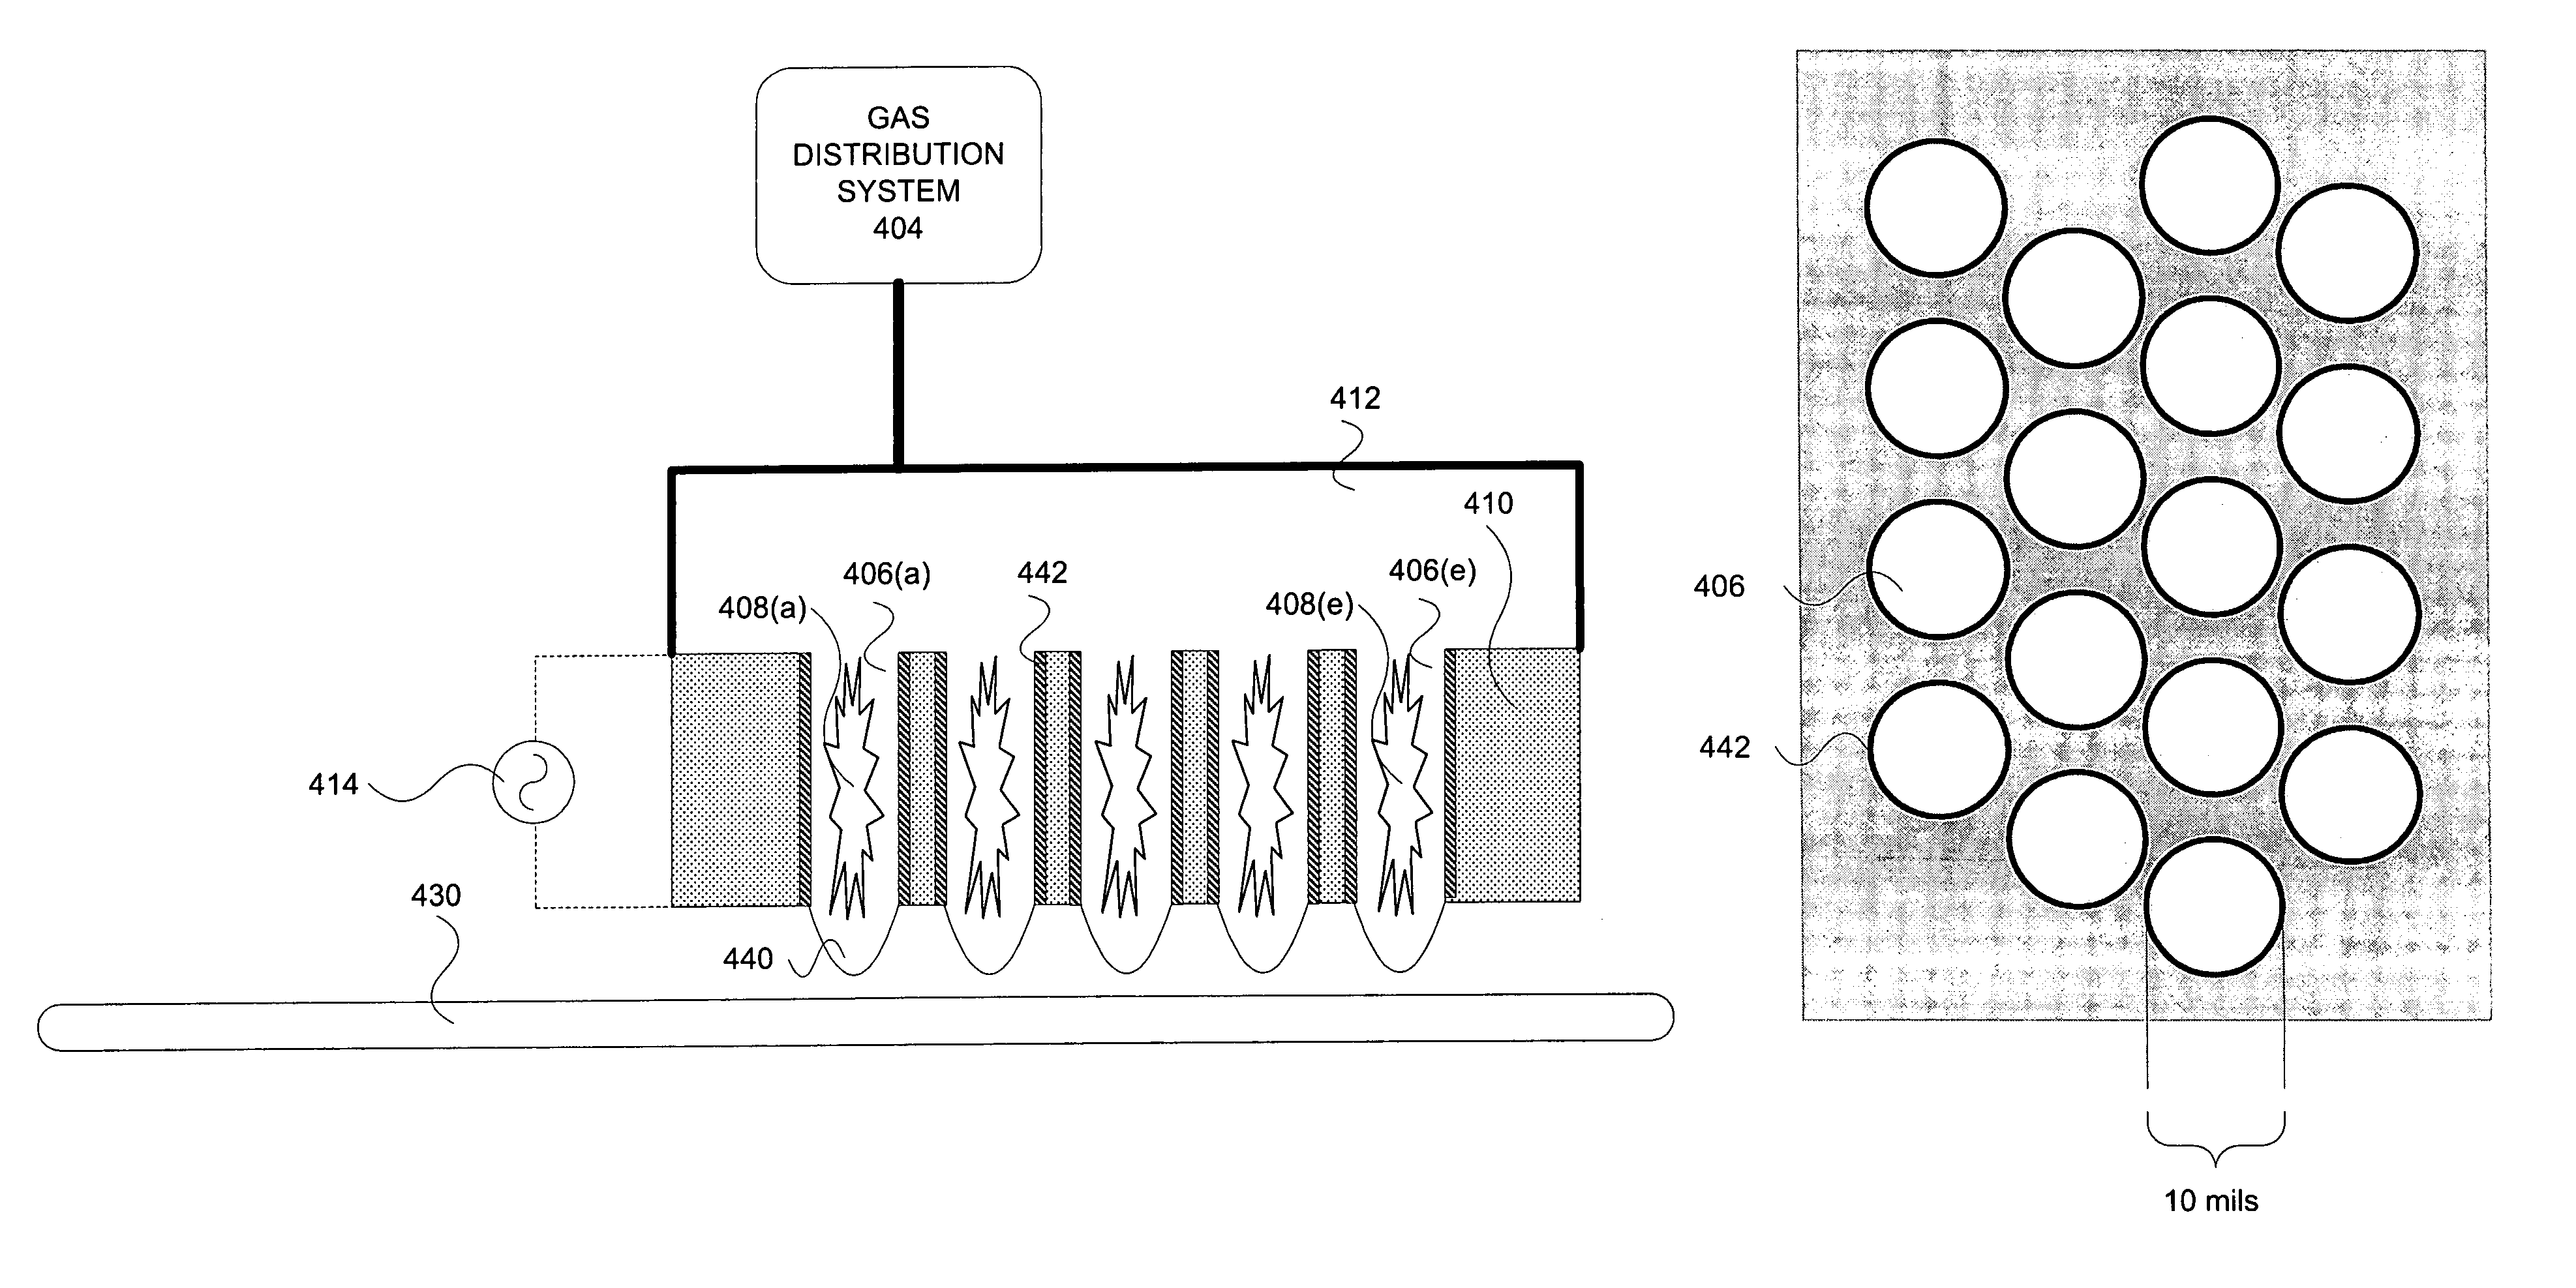 Apparatus for the optimization of atmospheric plasma in a processing system